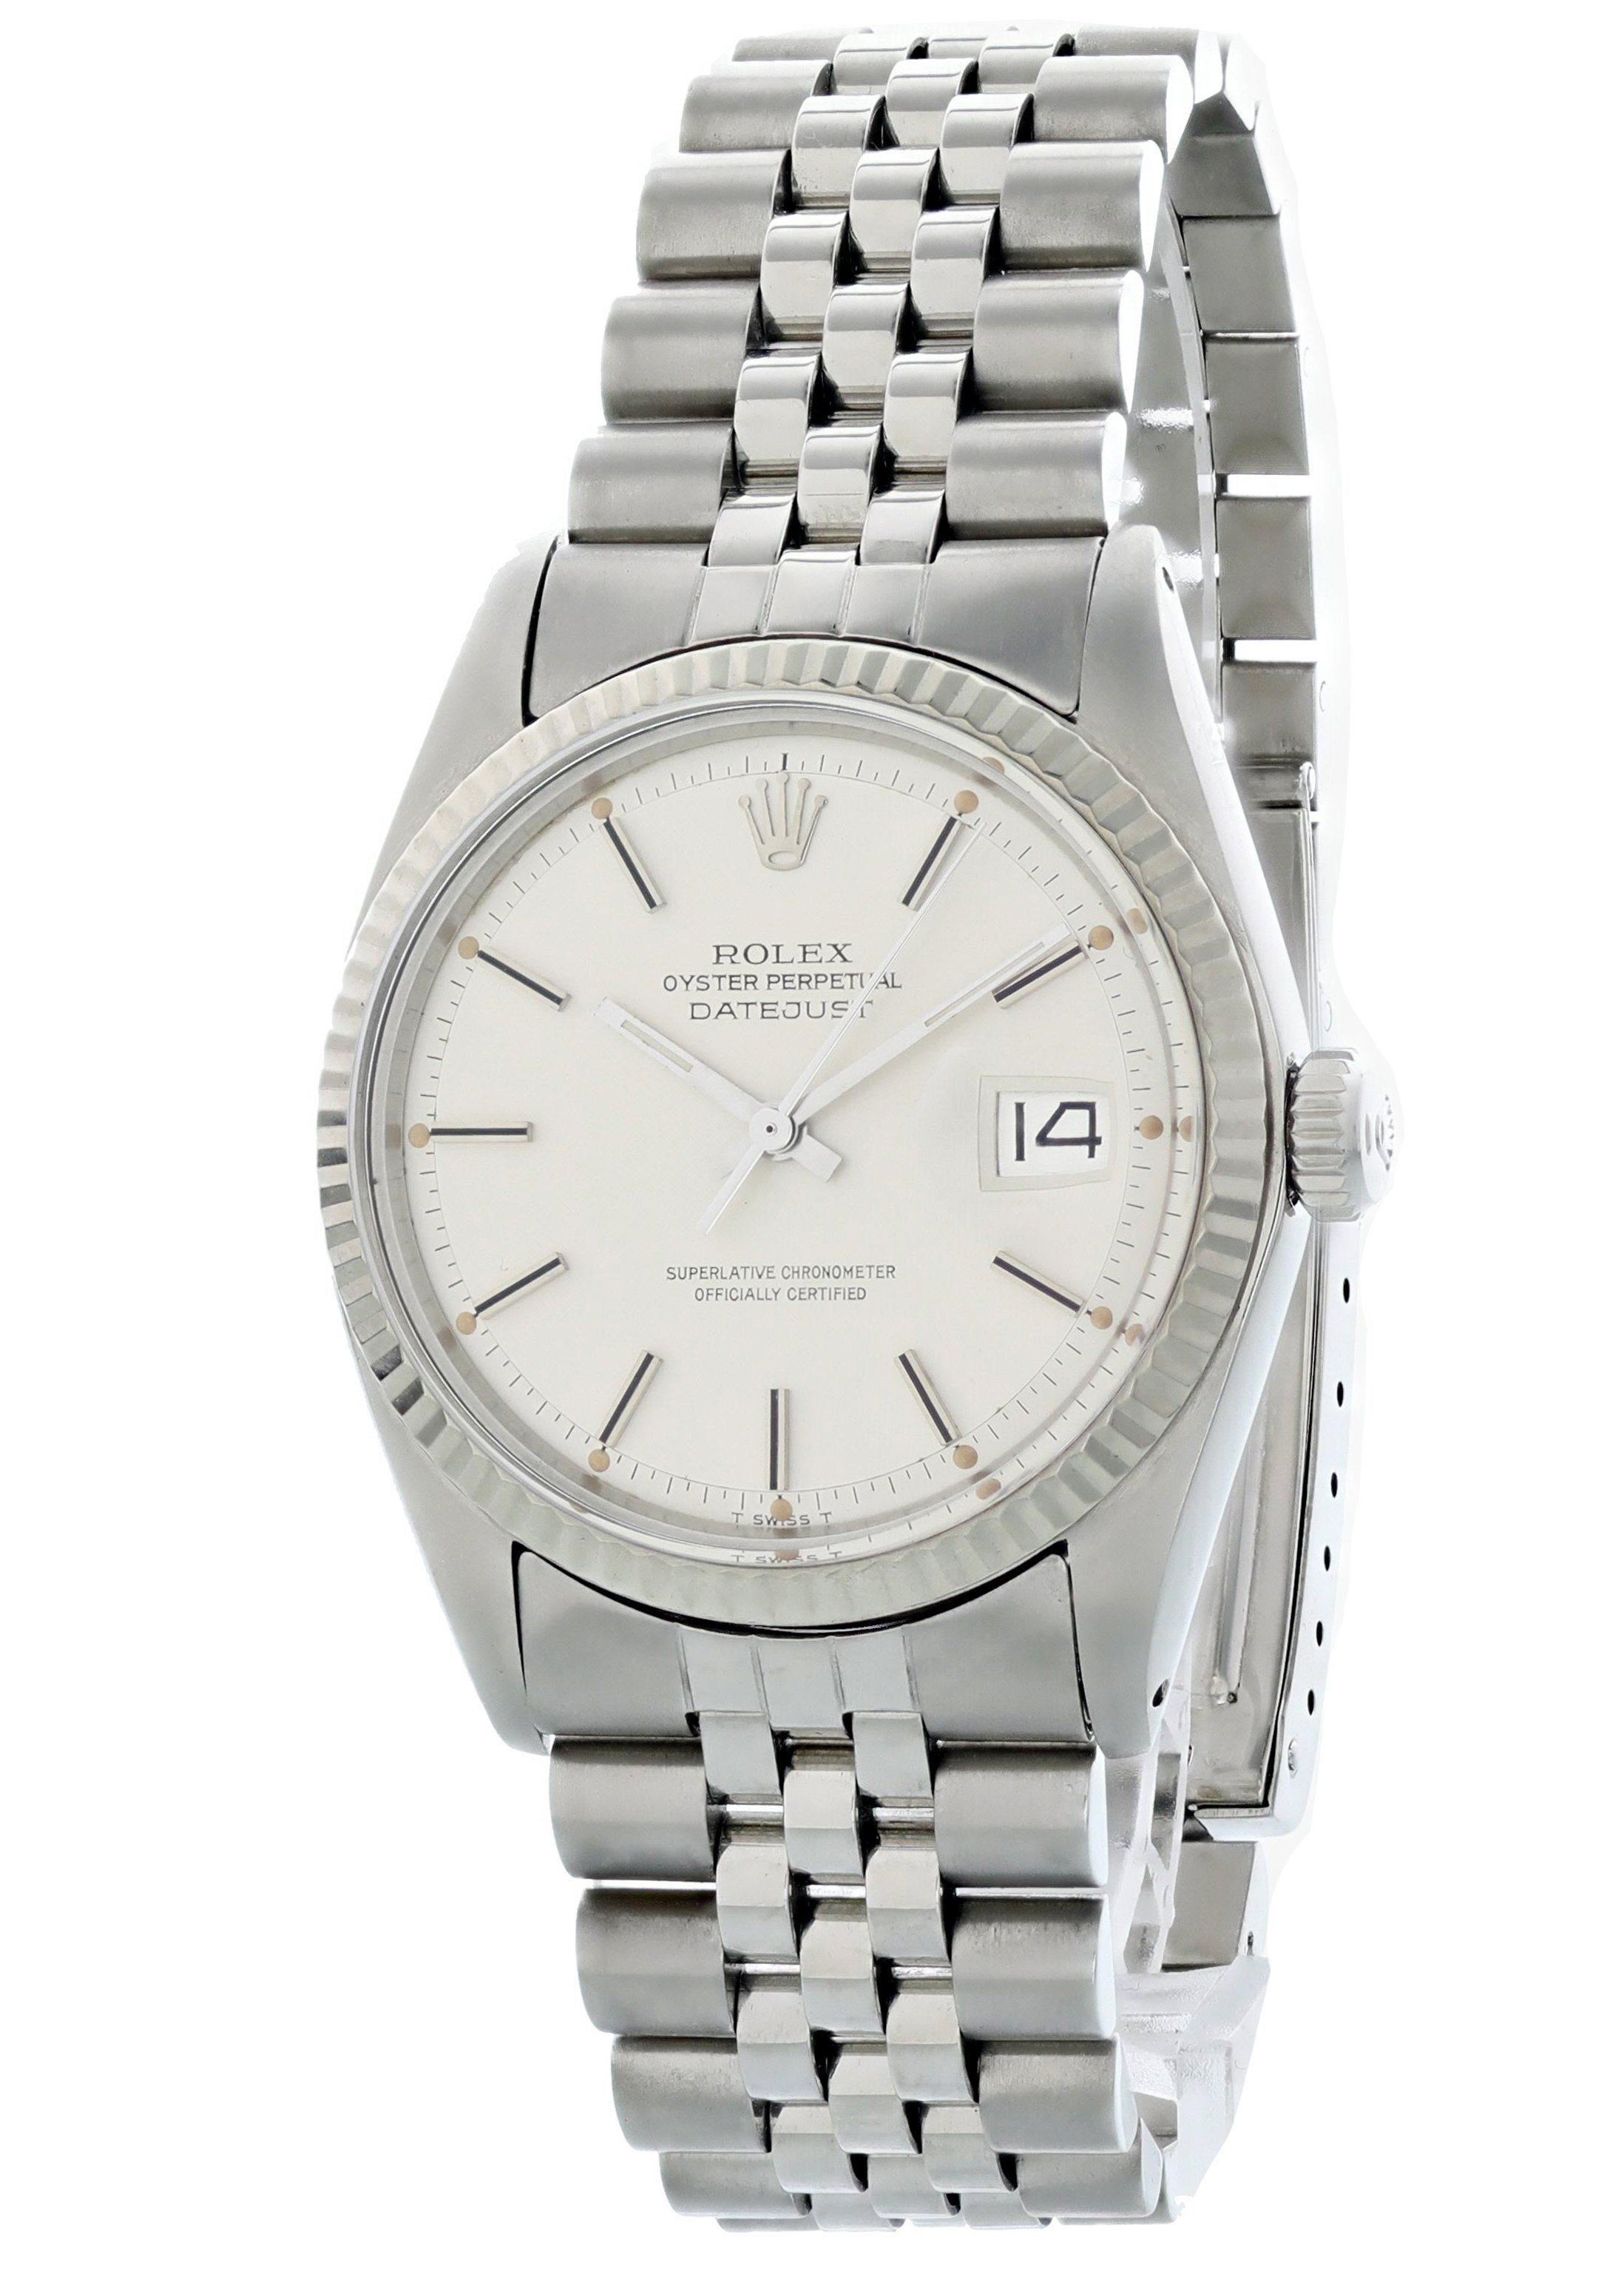 Rolex Oyster Perpetual Datejust 1601 Mens Watch. 36mm stainless steel case with an 18K white gold fluted bezel. Silver dial with steel hands and index hour markers. Minute markers around the outer dial. Date display at the 3 o'clock position.